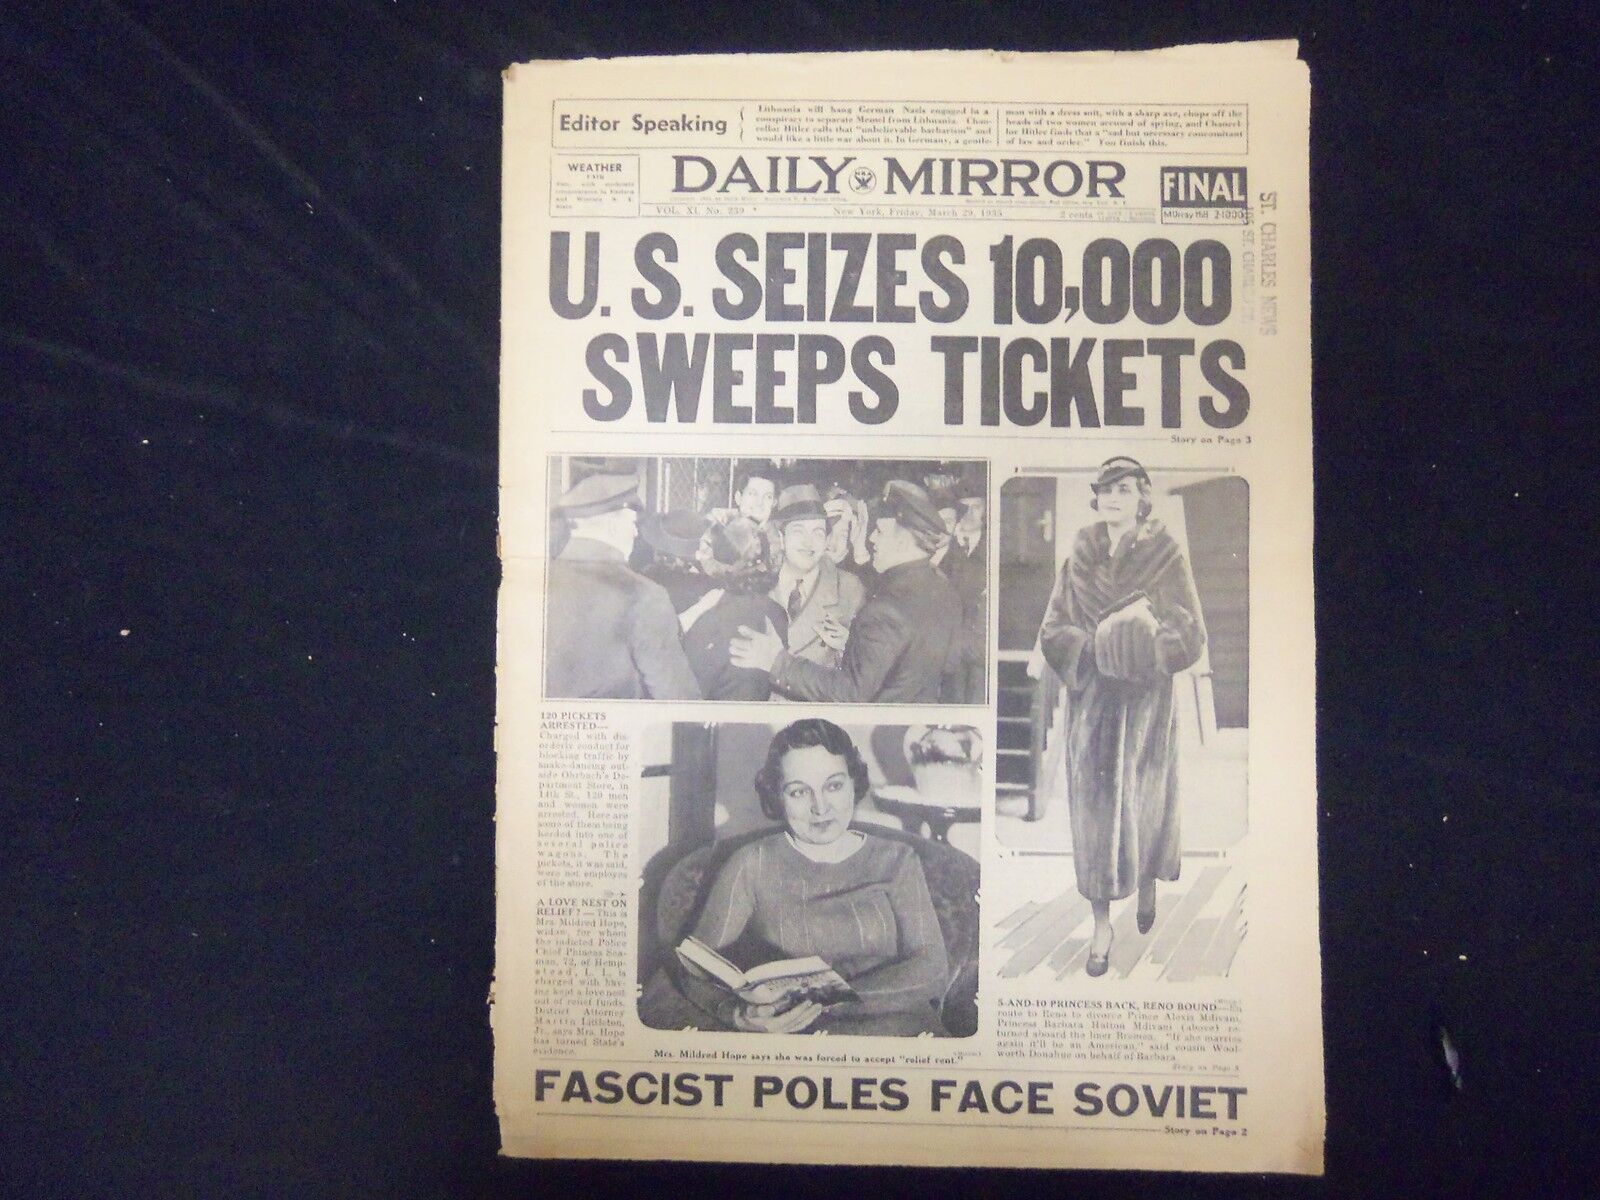 1935 MARCH 29 NEW YORK DAILY MIRROR- U.S. SEIZES 10,000 SWEEPS TICKETS - NP 2134